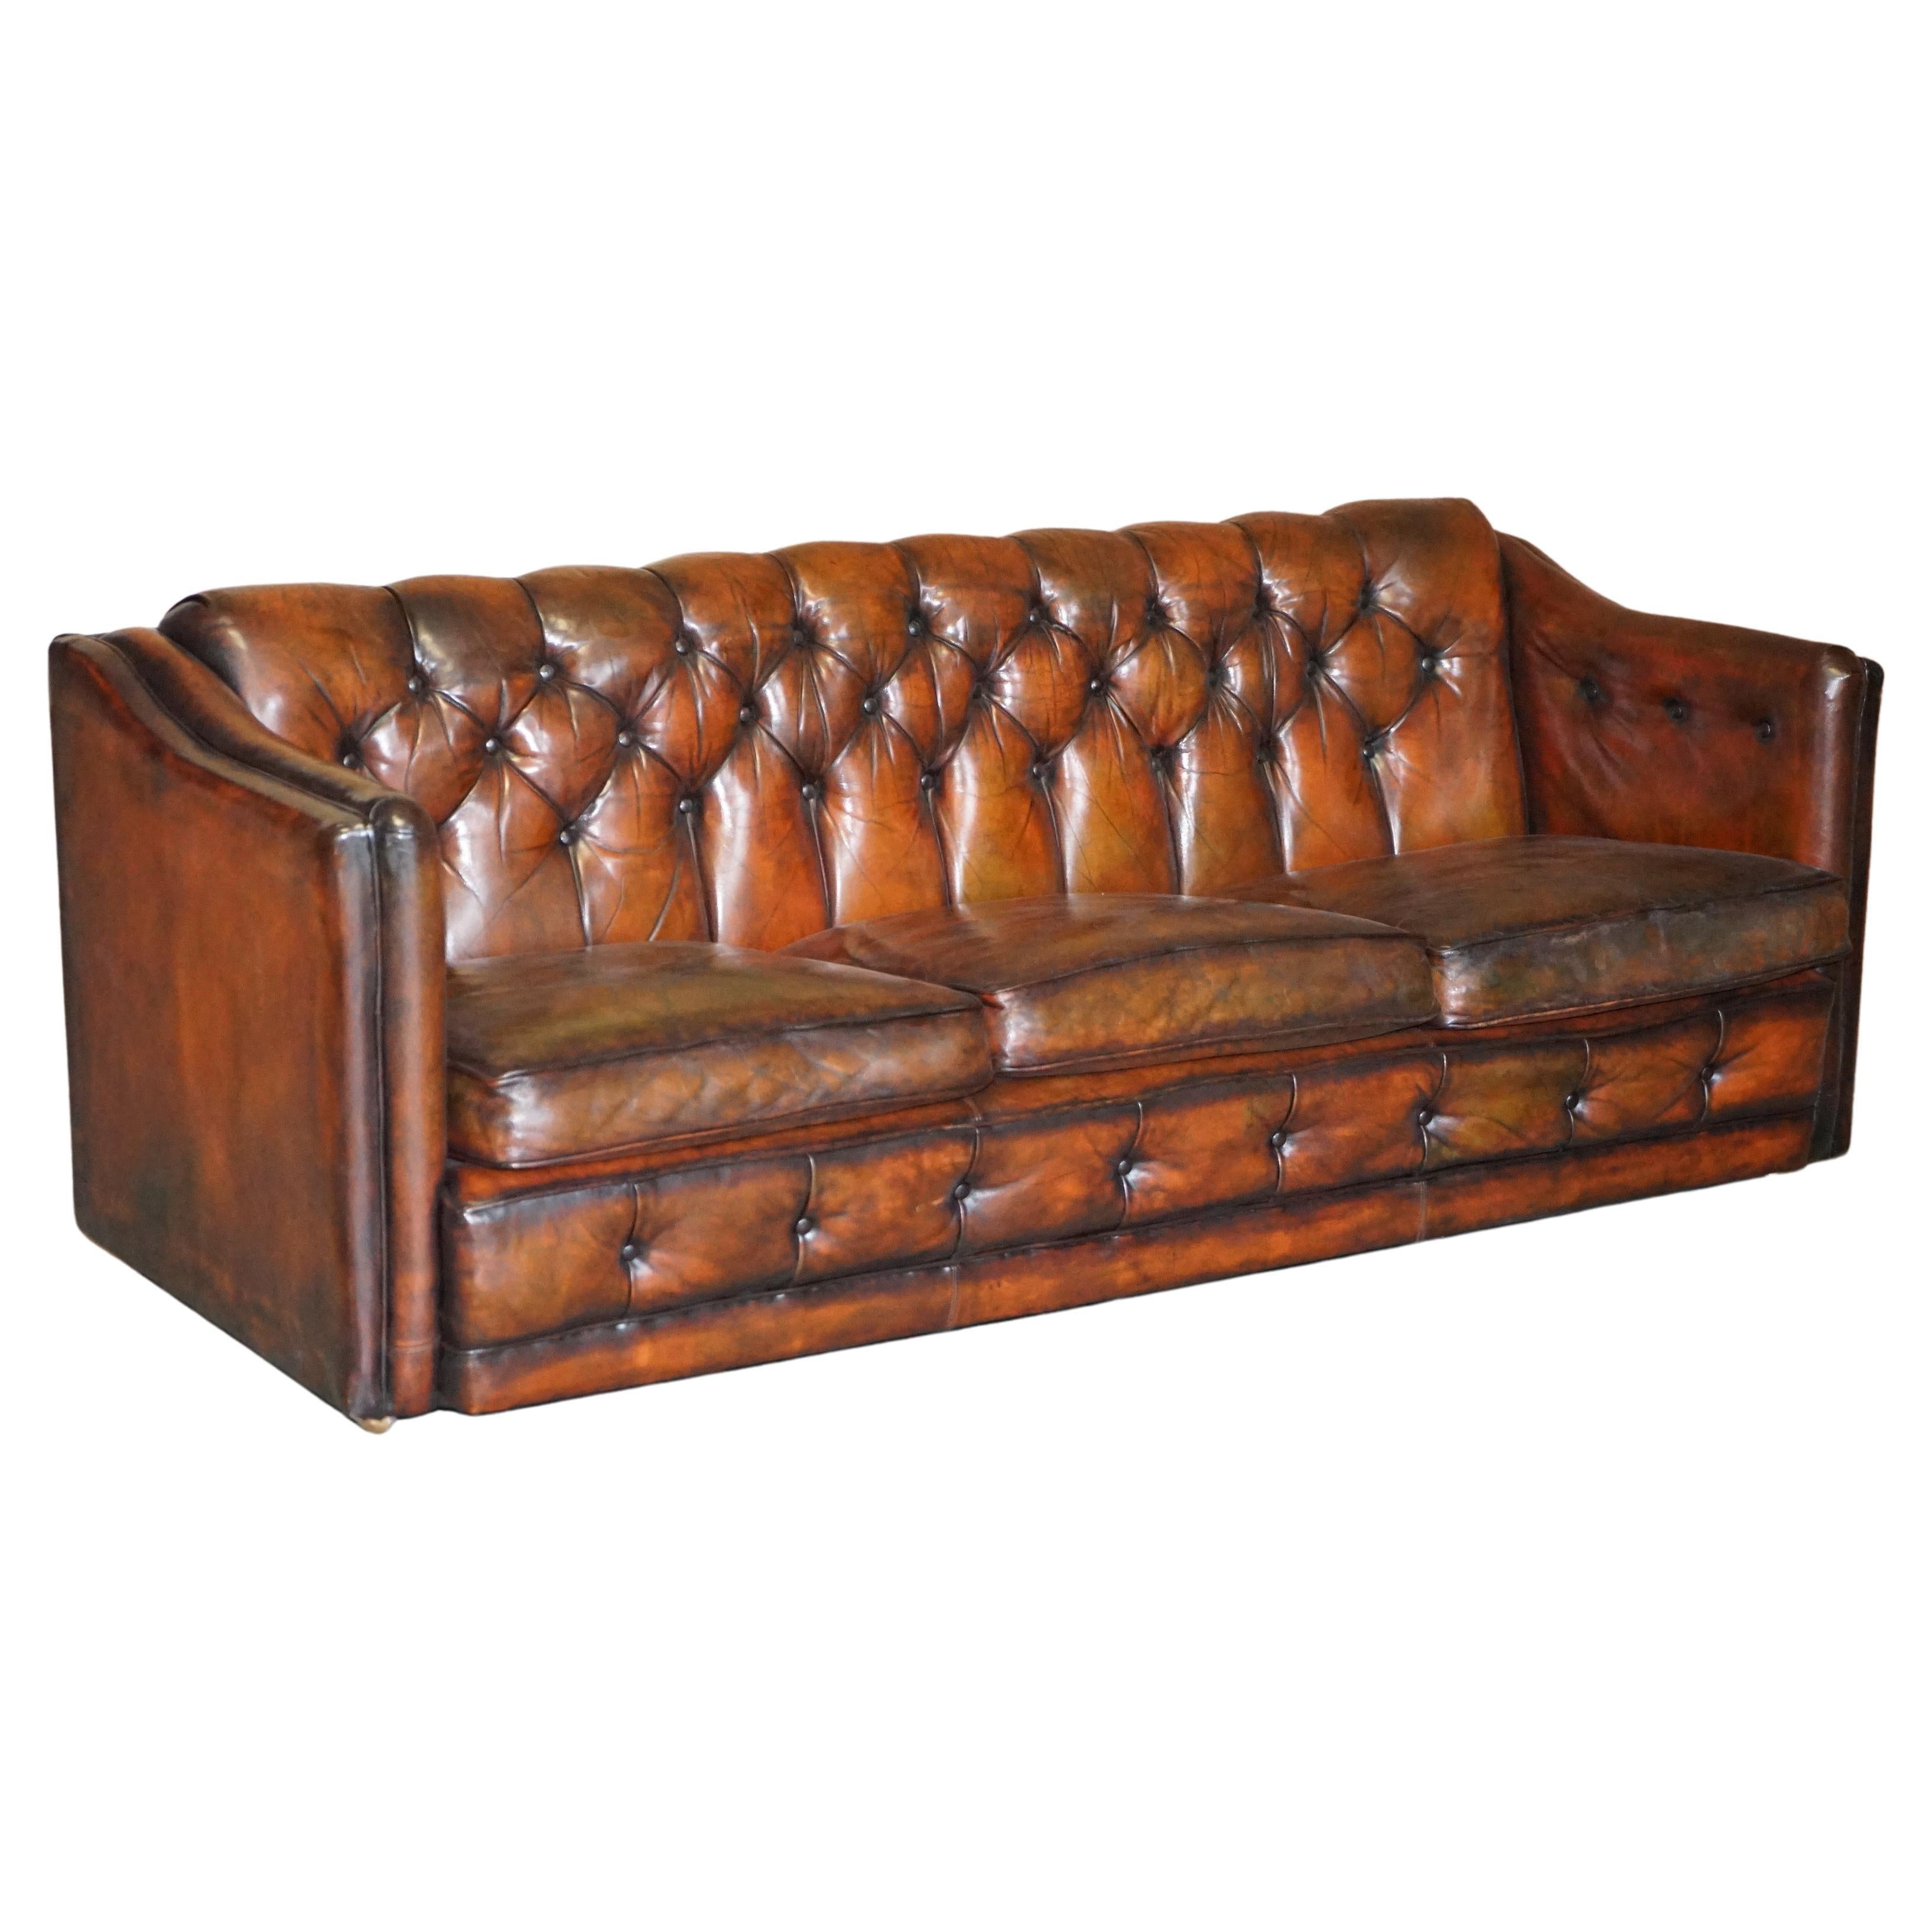 Circa 1920's Art Deco Fully Restored Chesterfield Brown Leather Sofa Part Suite For Sale